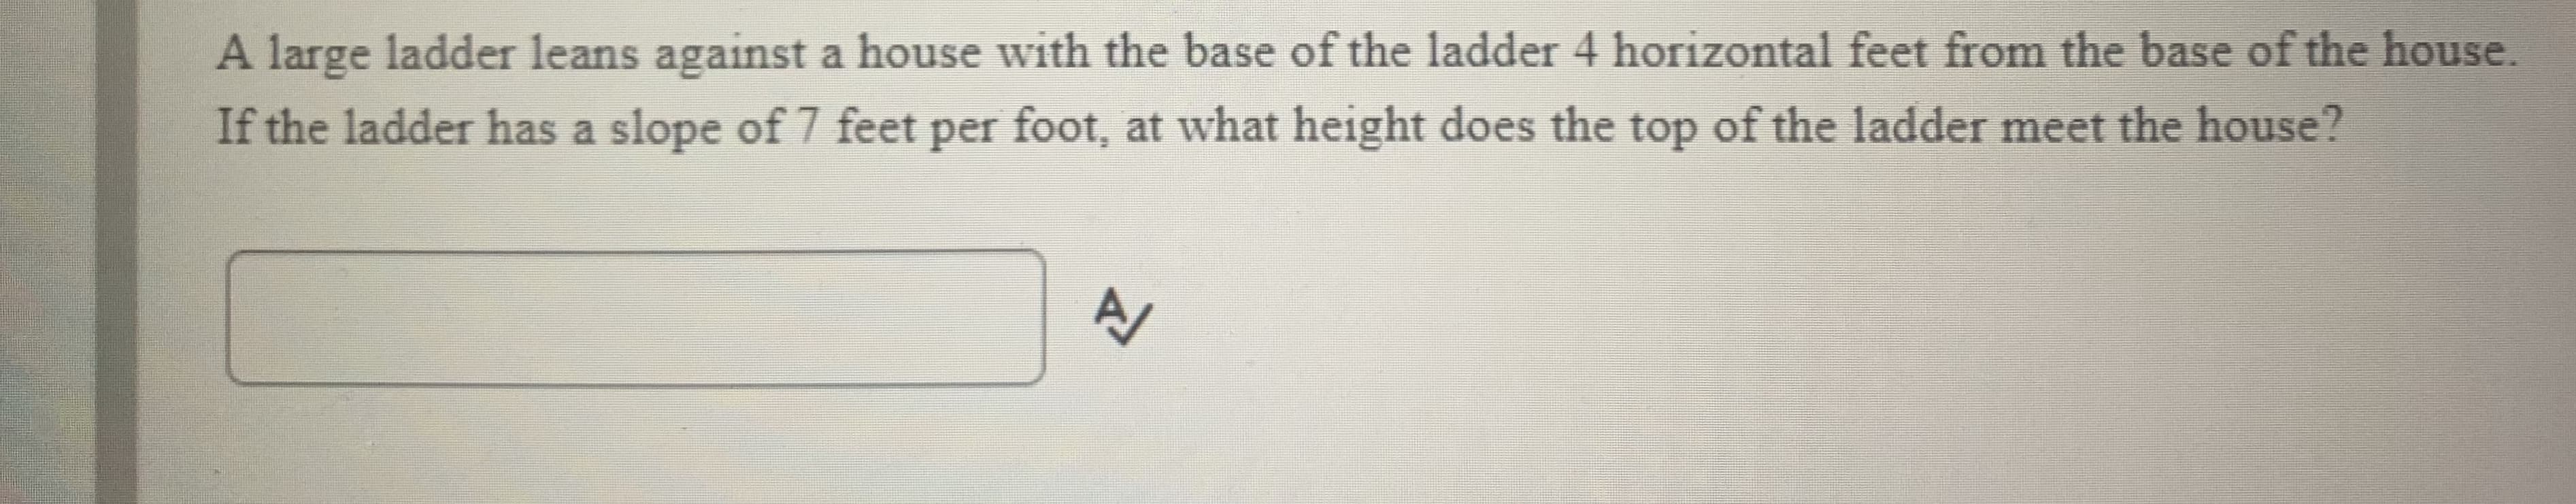 A large ladder leans against a house with the base of the ladder 4 horizontal feet from the base of the house.
If the ladder has a slope of 7 feet per foot, at what height does the top of the ladder meet the house?
